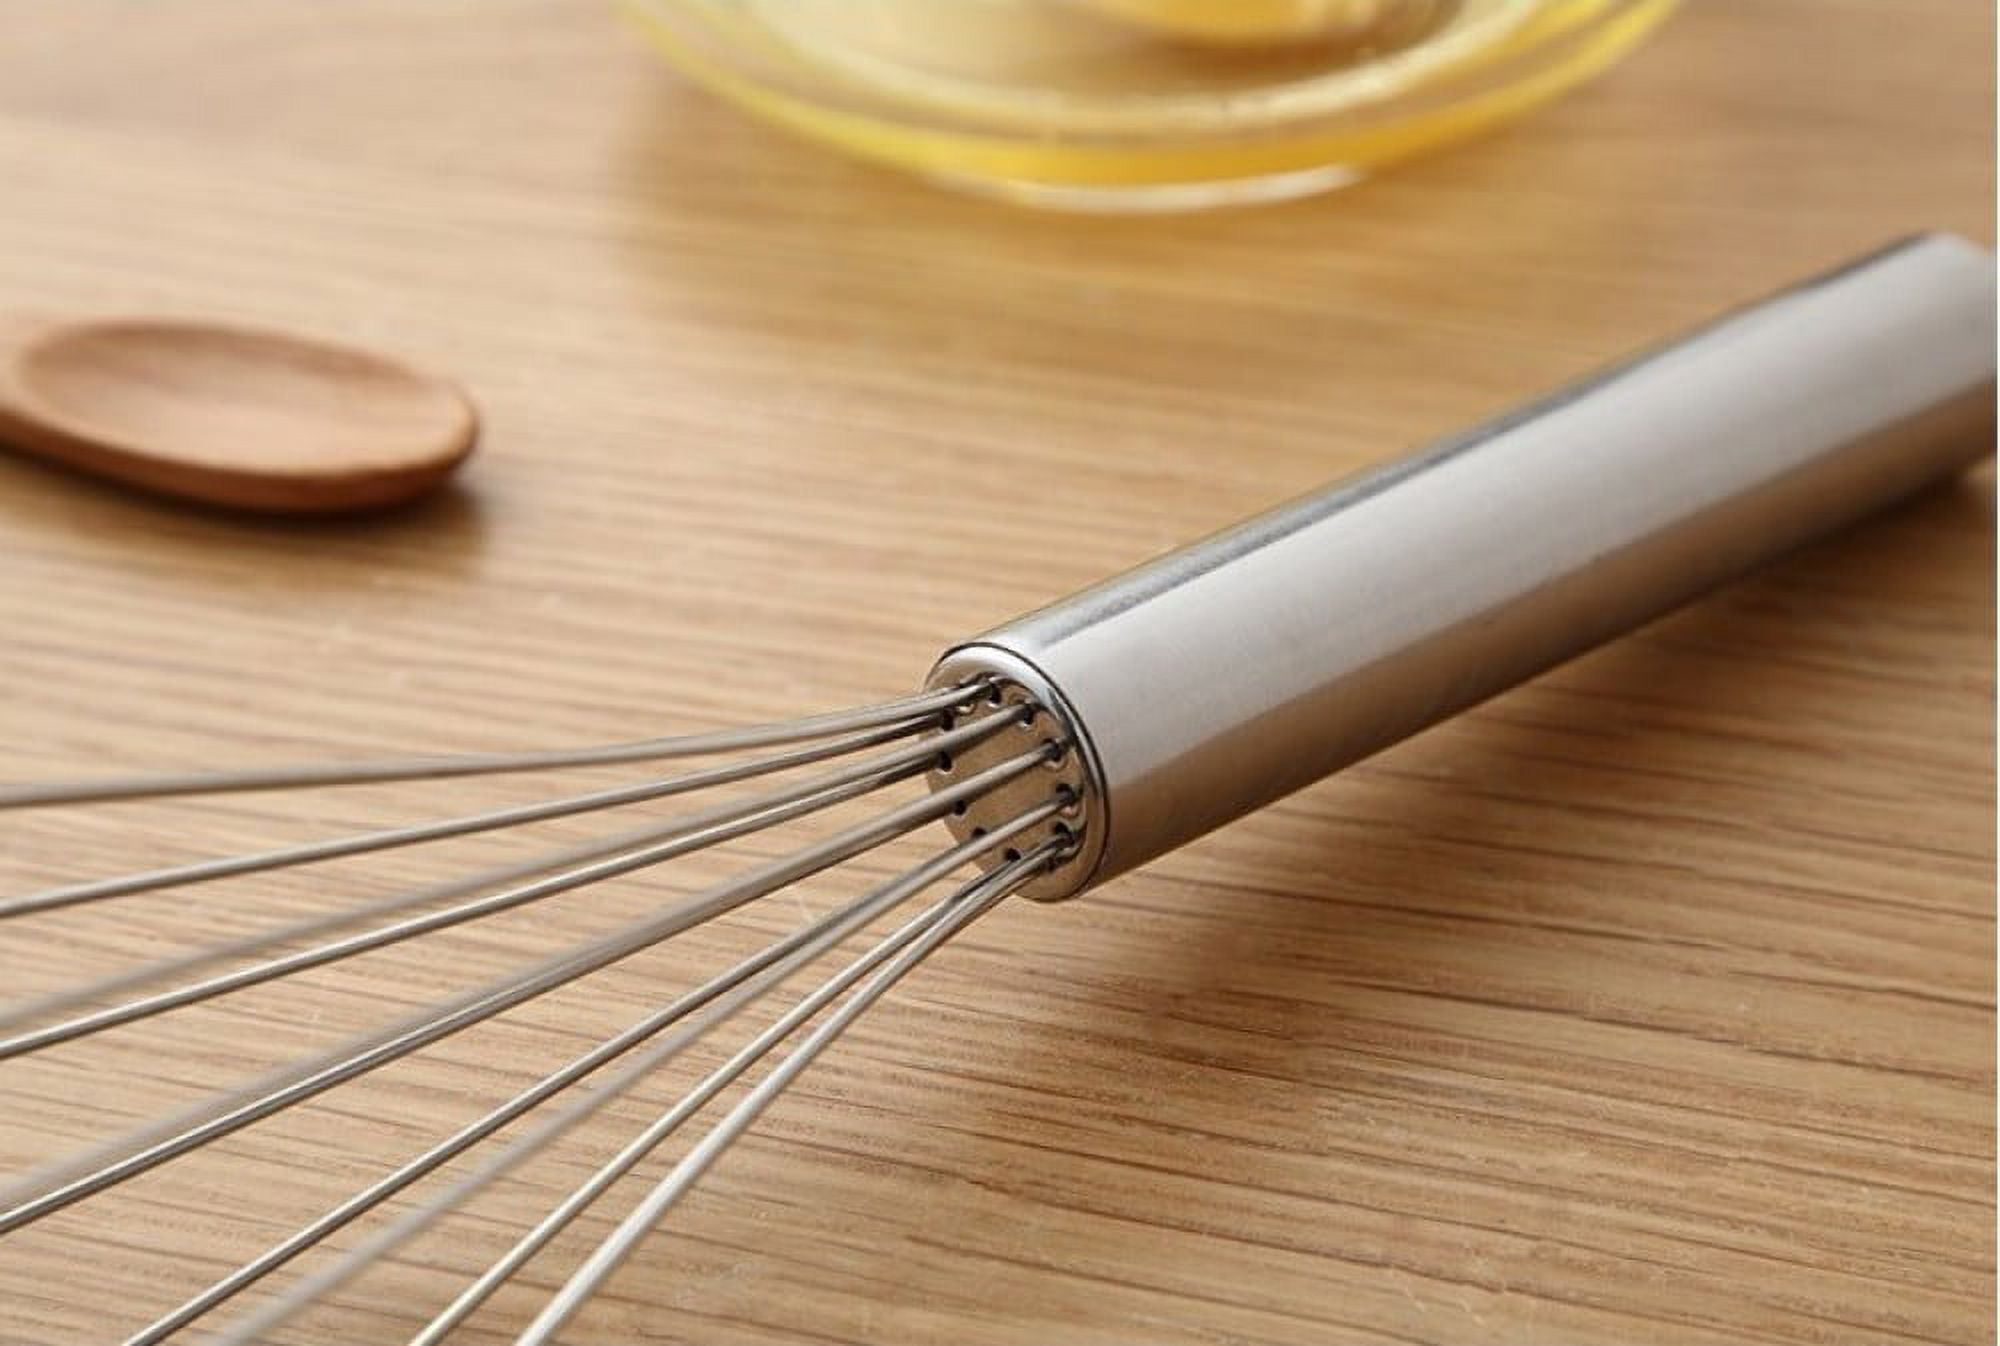 3 Pcs Large Small Metal Mini Whisk Sets Stainless Steel Egg Wire Tiny Whisks